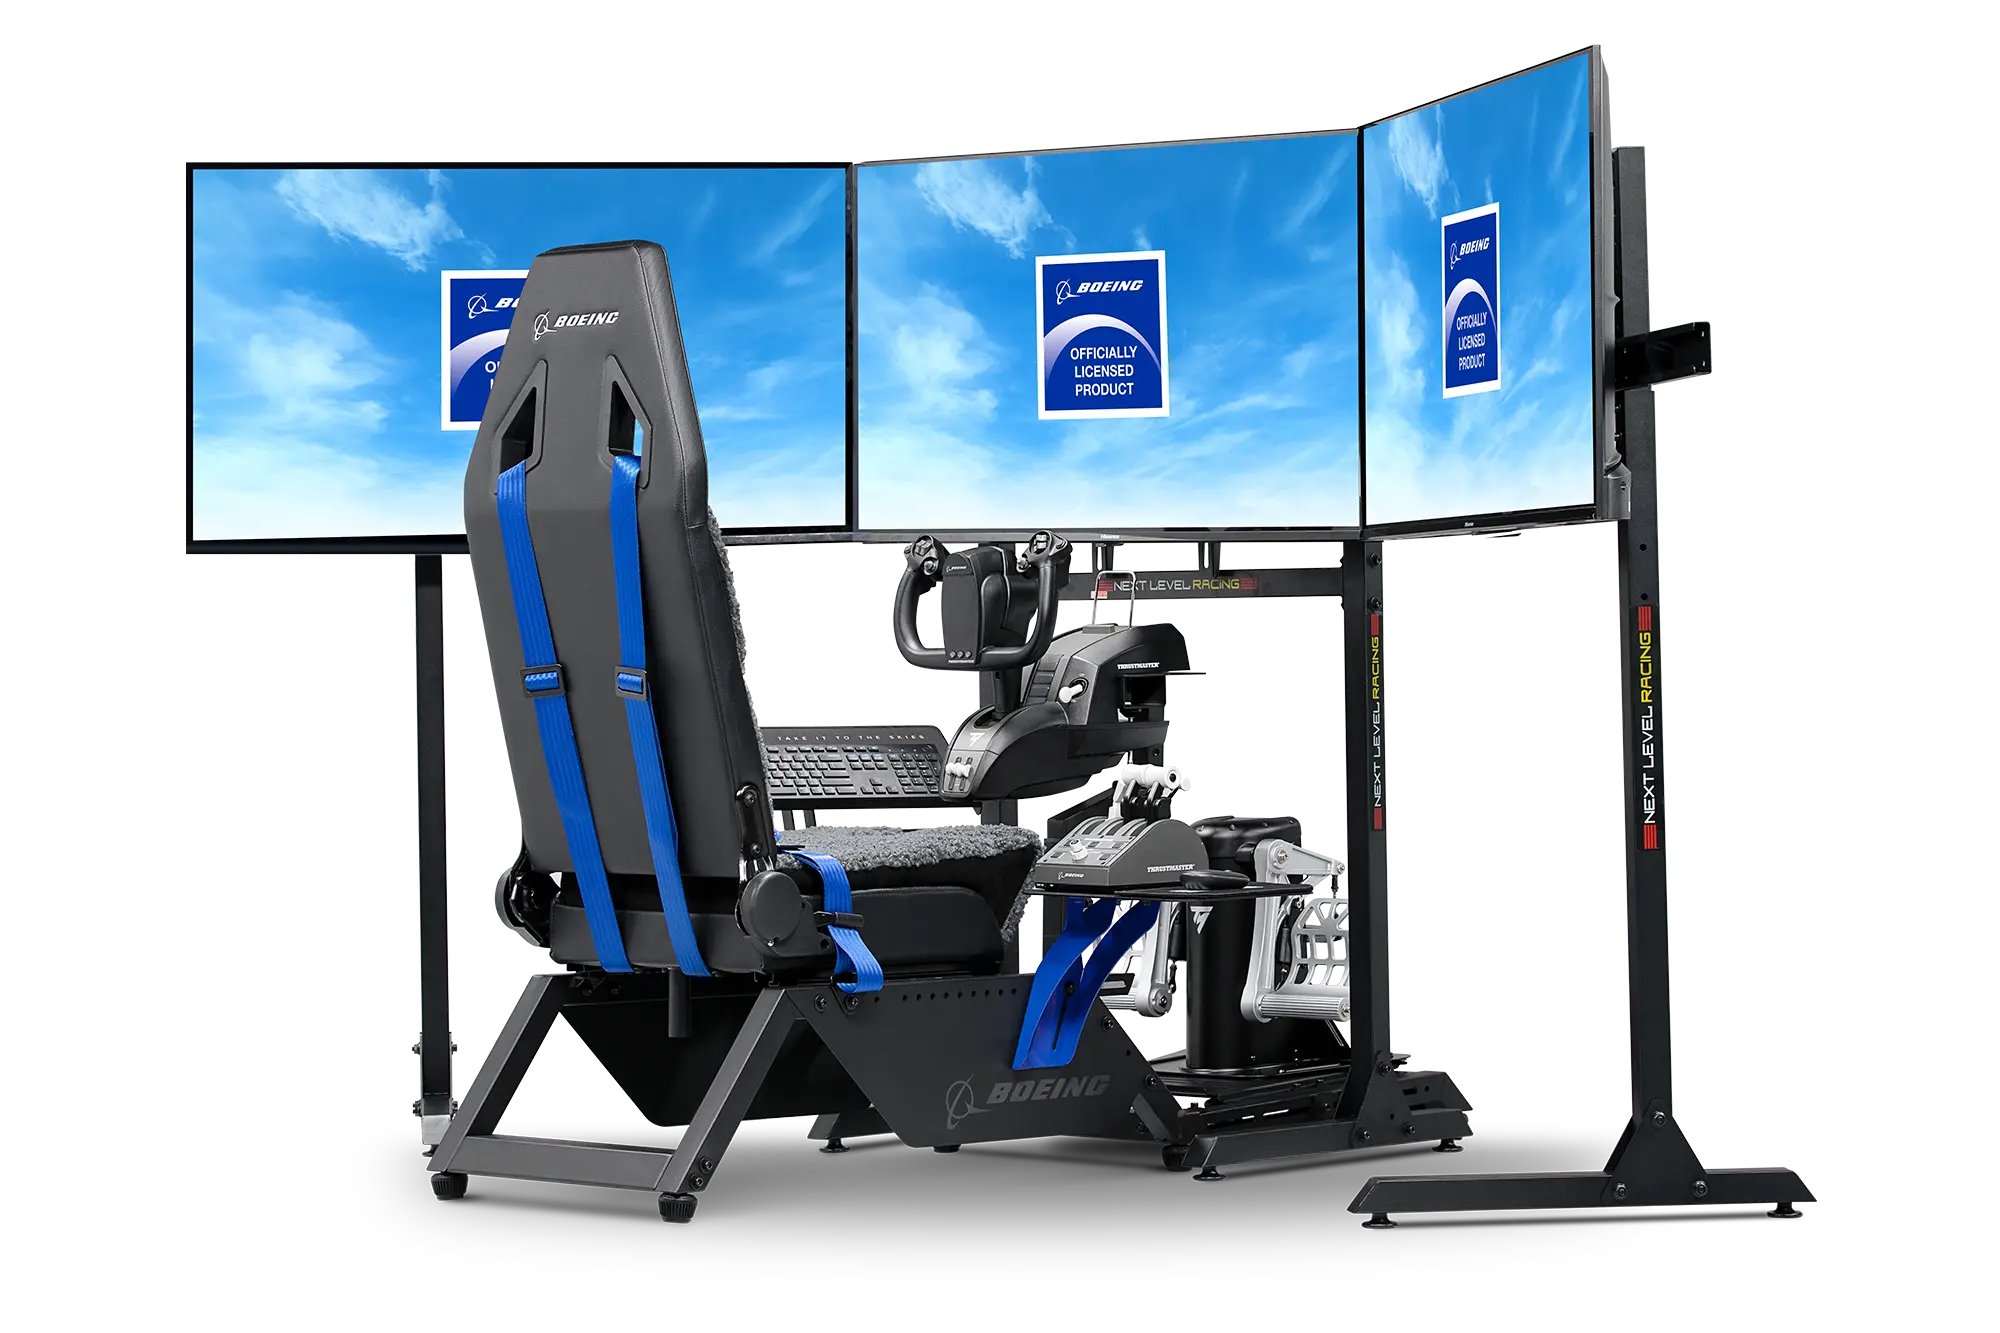 Next Level Racing Flight Simulator - Boeing Commercial Edition (NLR-S027)